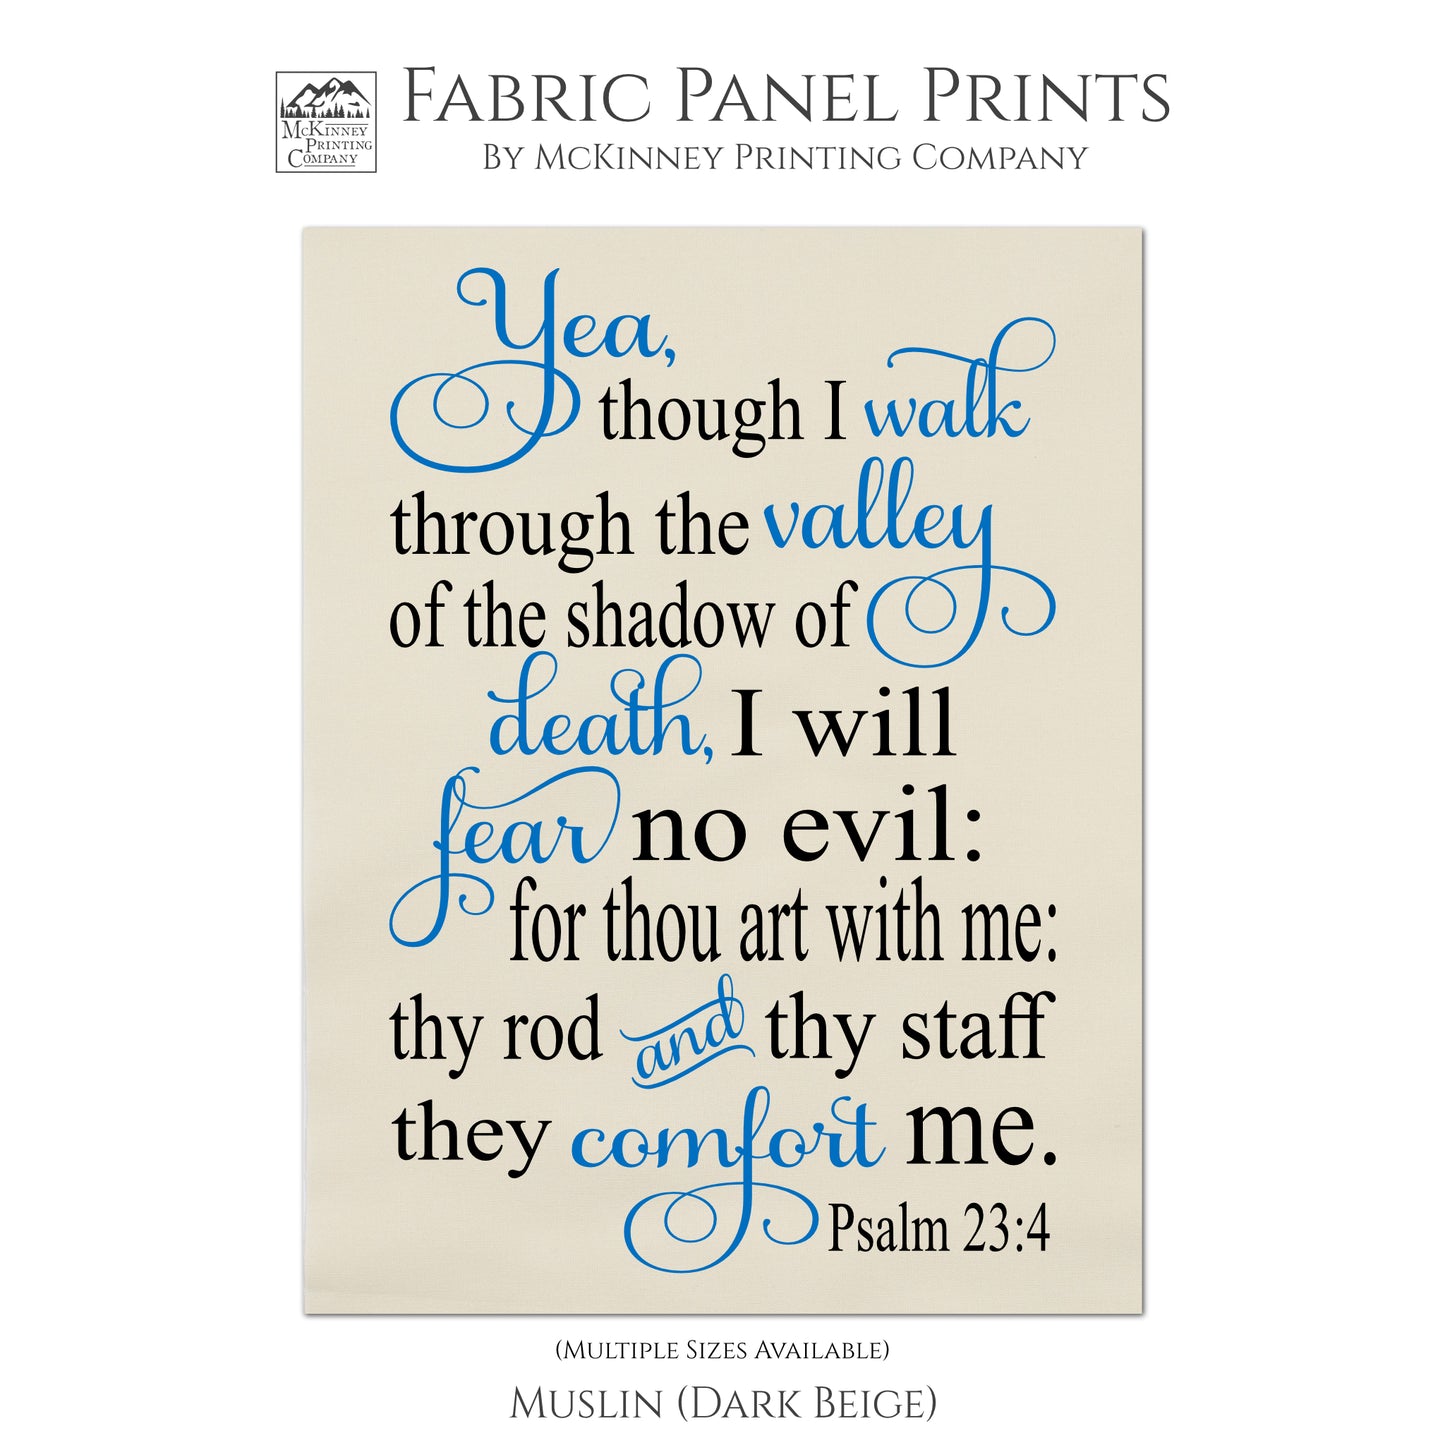 Yea, though I walk through the valley of the shadow of death, I will fear no evil: for thou art with me: they rod and they staff they comfort me - Psalm 23:4 - Scripture Fabric, Panel, Quilt Block - Muslin